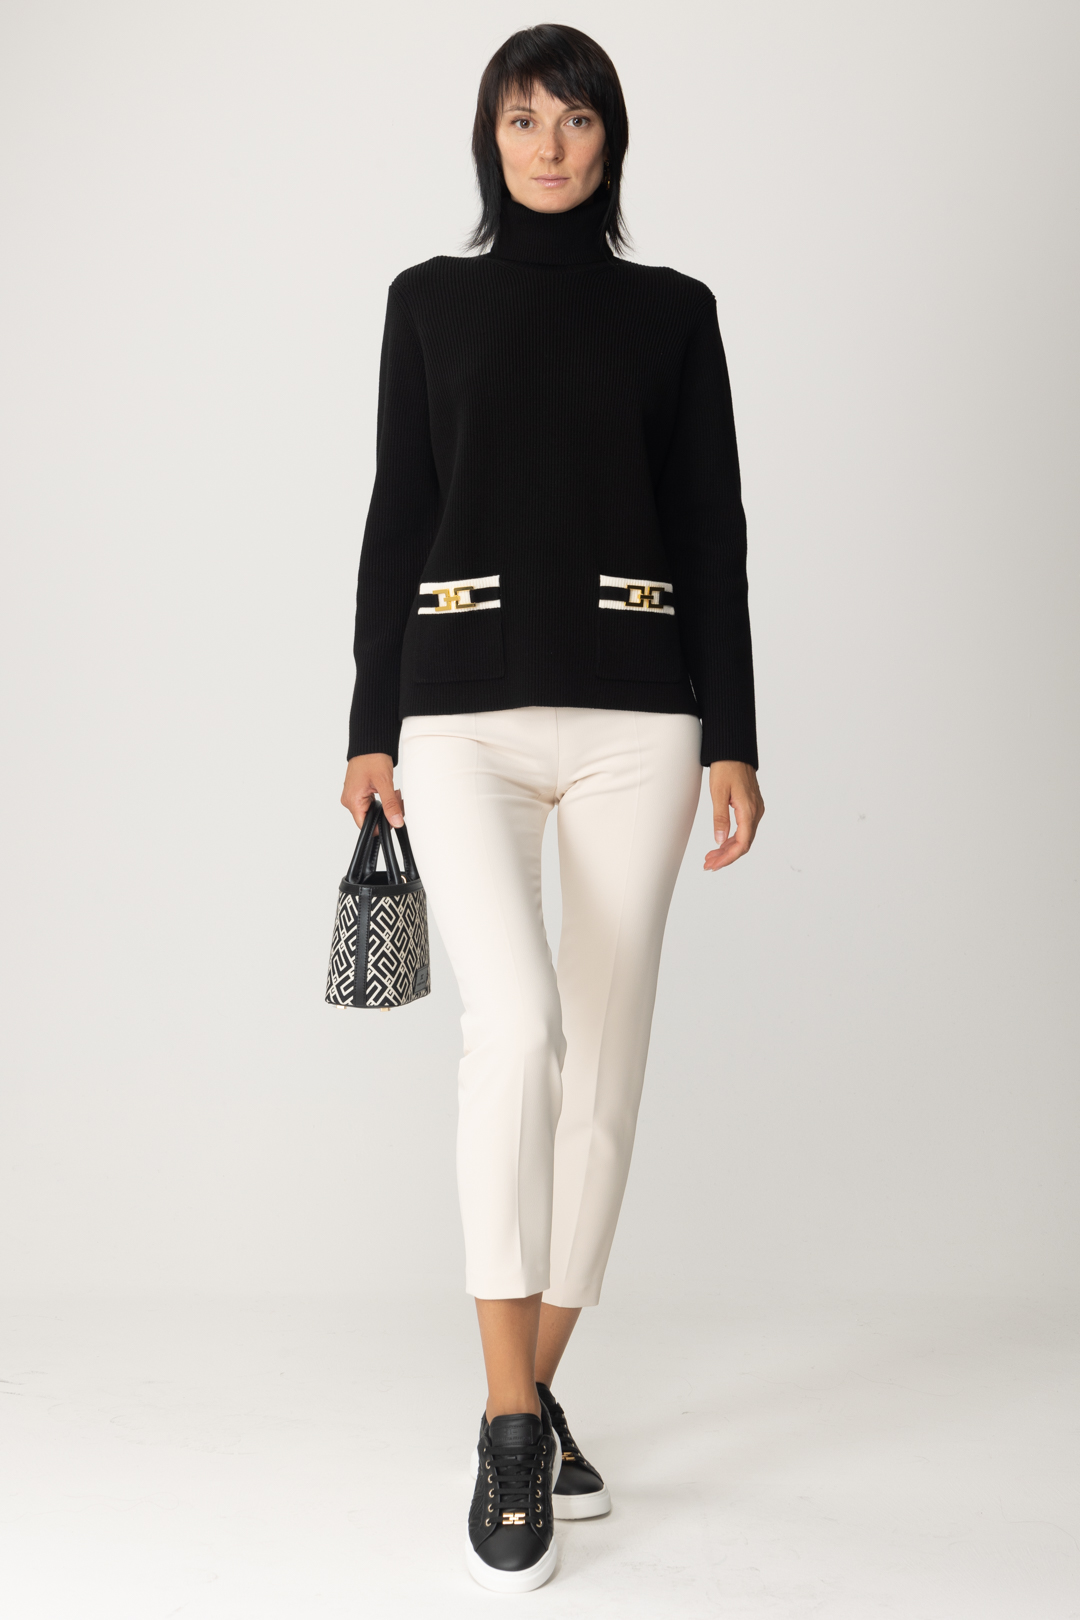 Preview: Elisabetta Franchi Turtleneck with branded clamps Nero/Burro